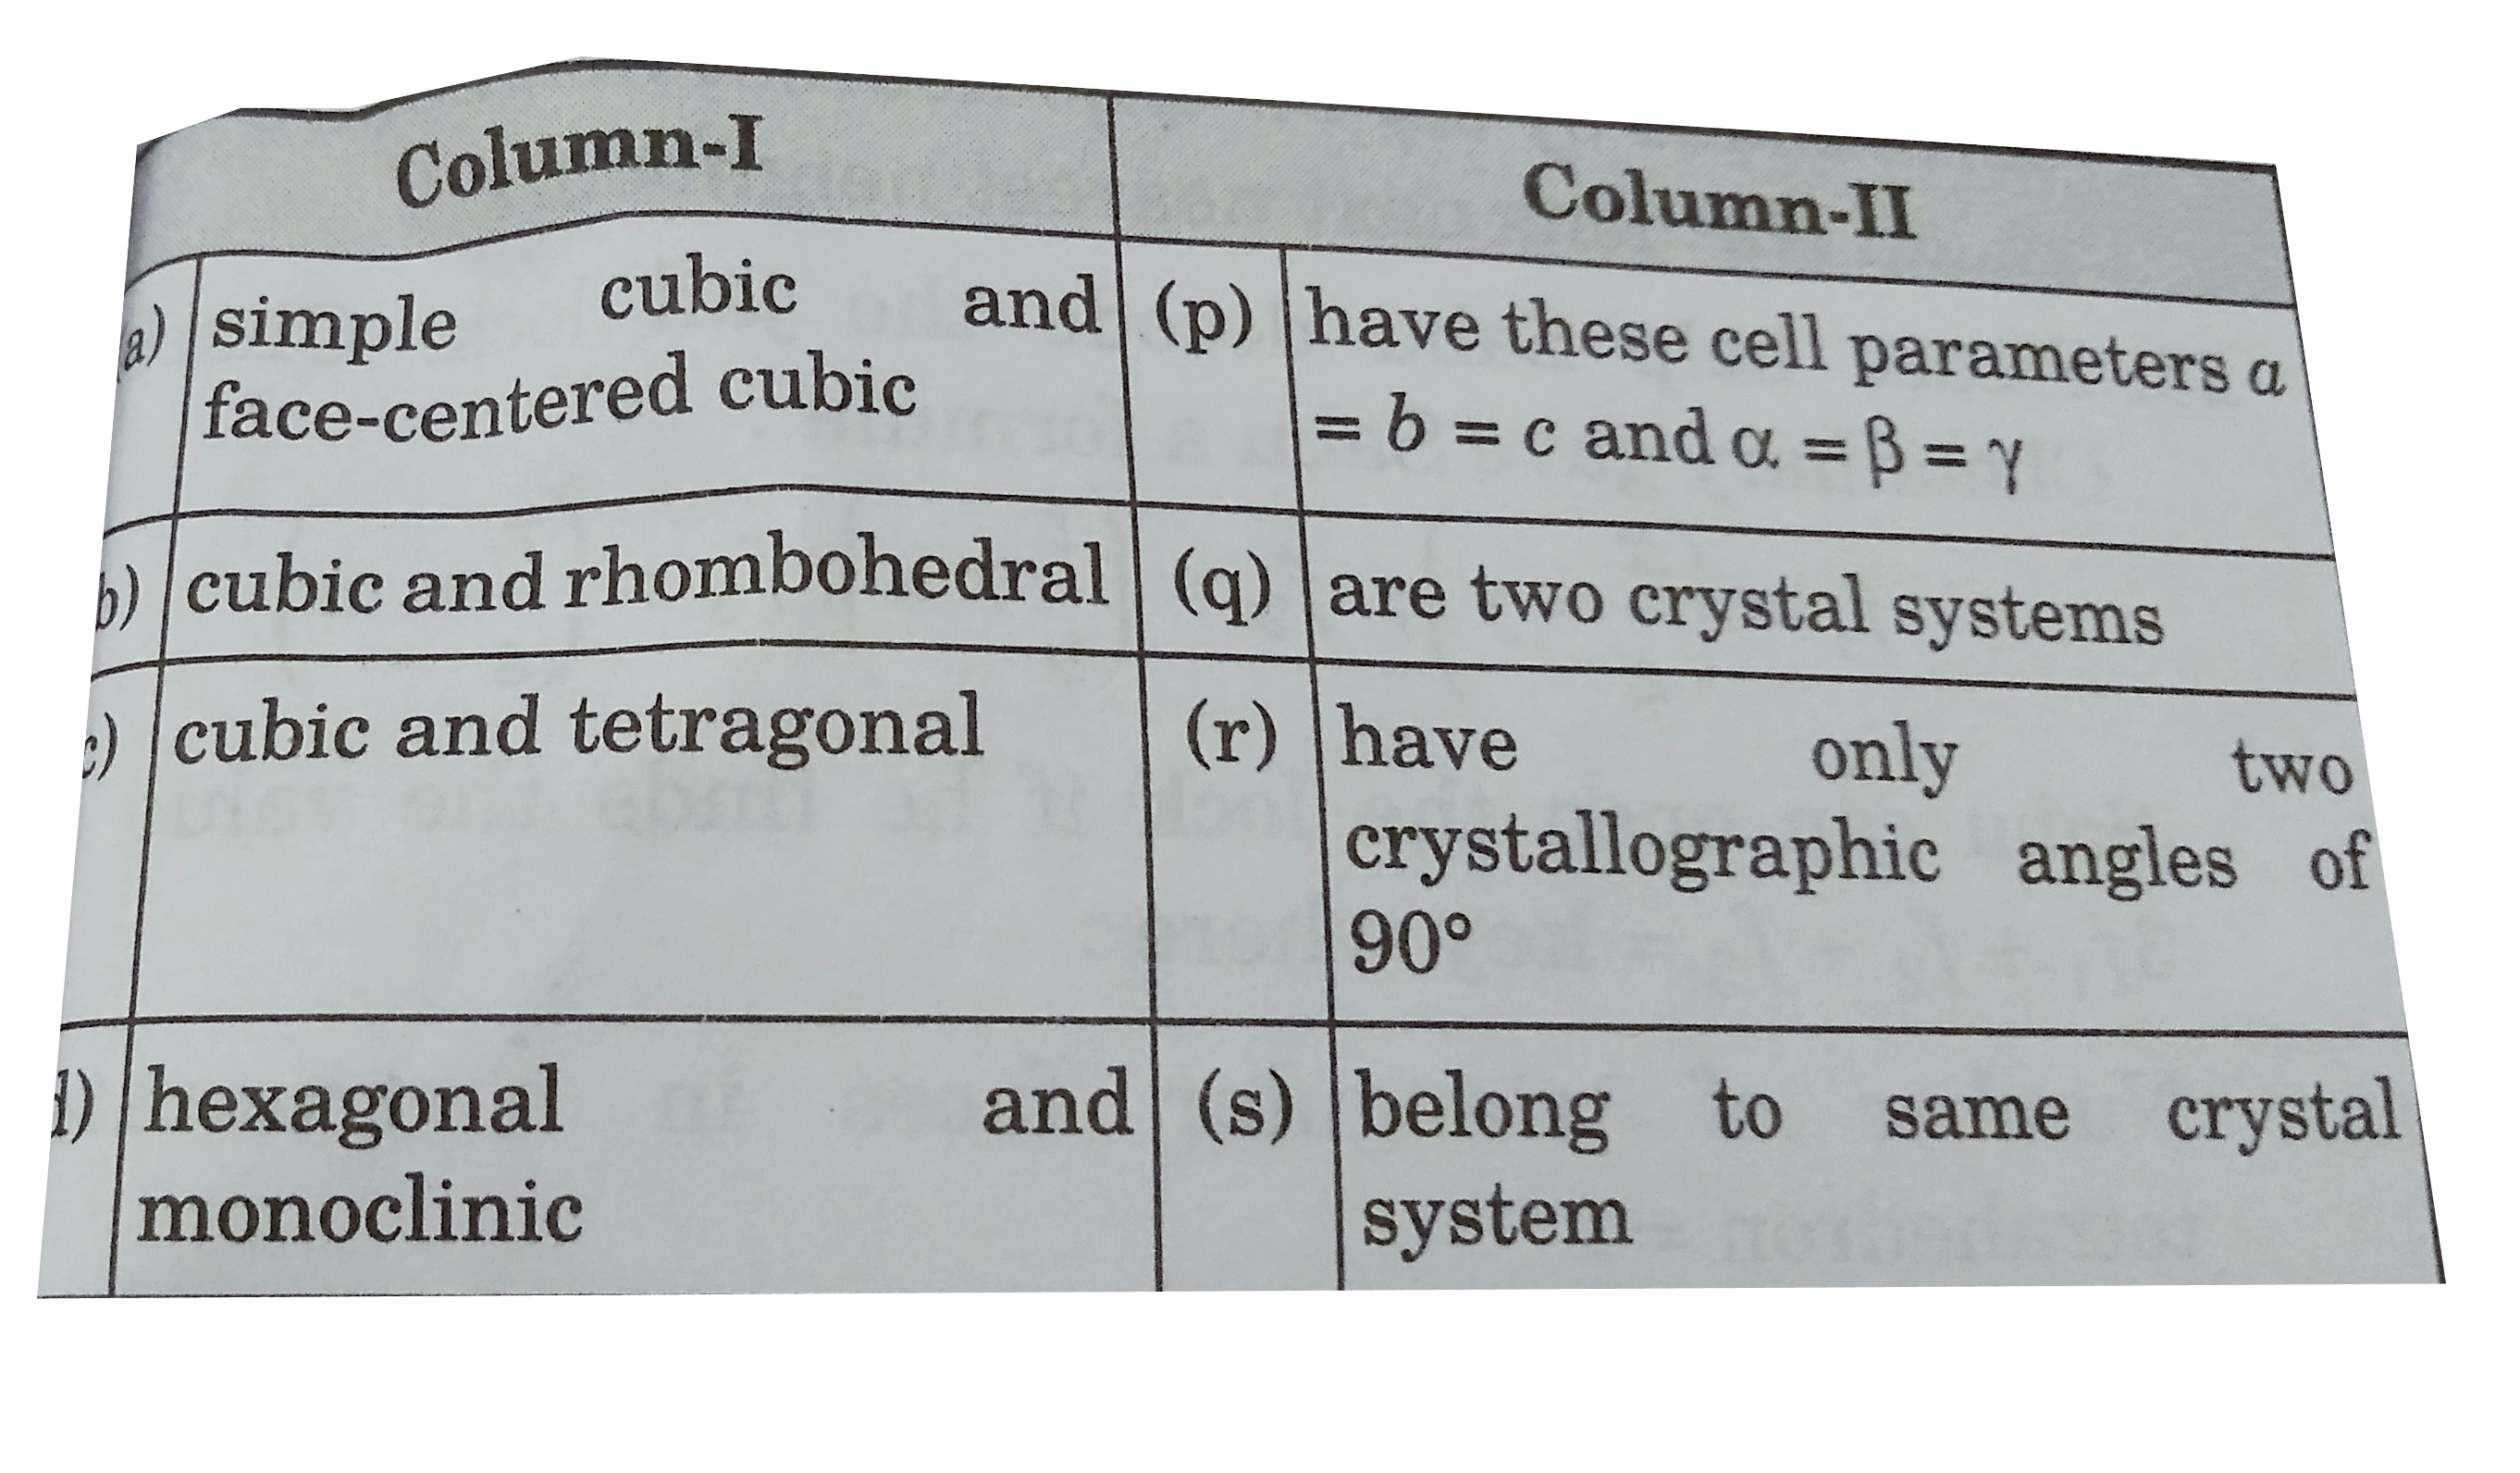 Match the crystal system/unit, cells mentioned in Column-I with their characteristic features mentioned in Column-II.